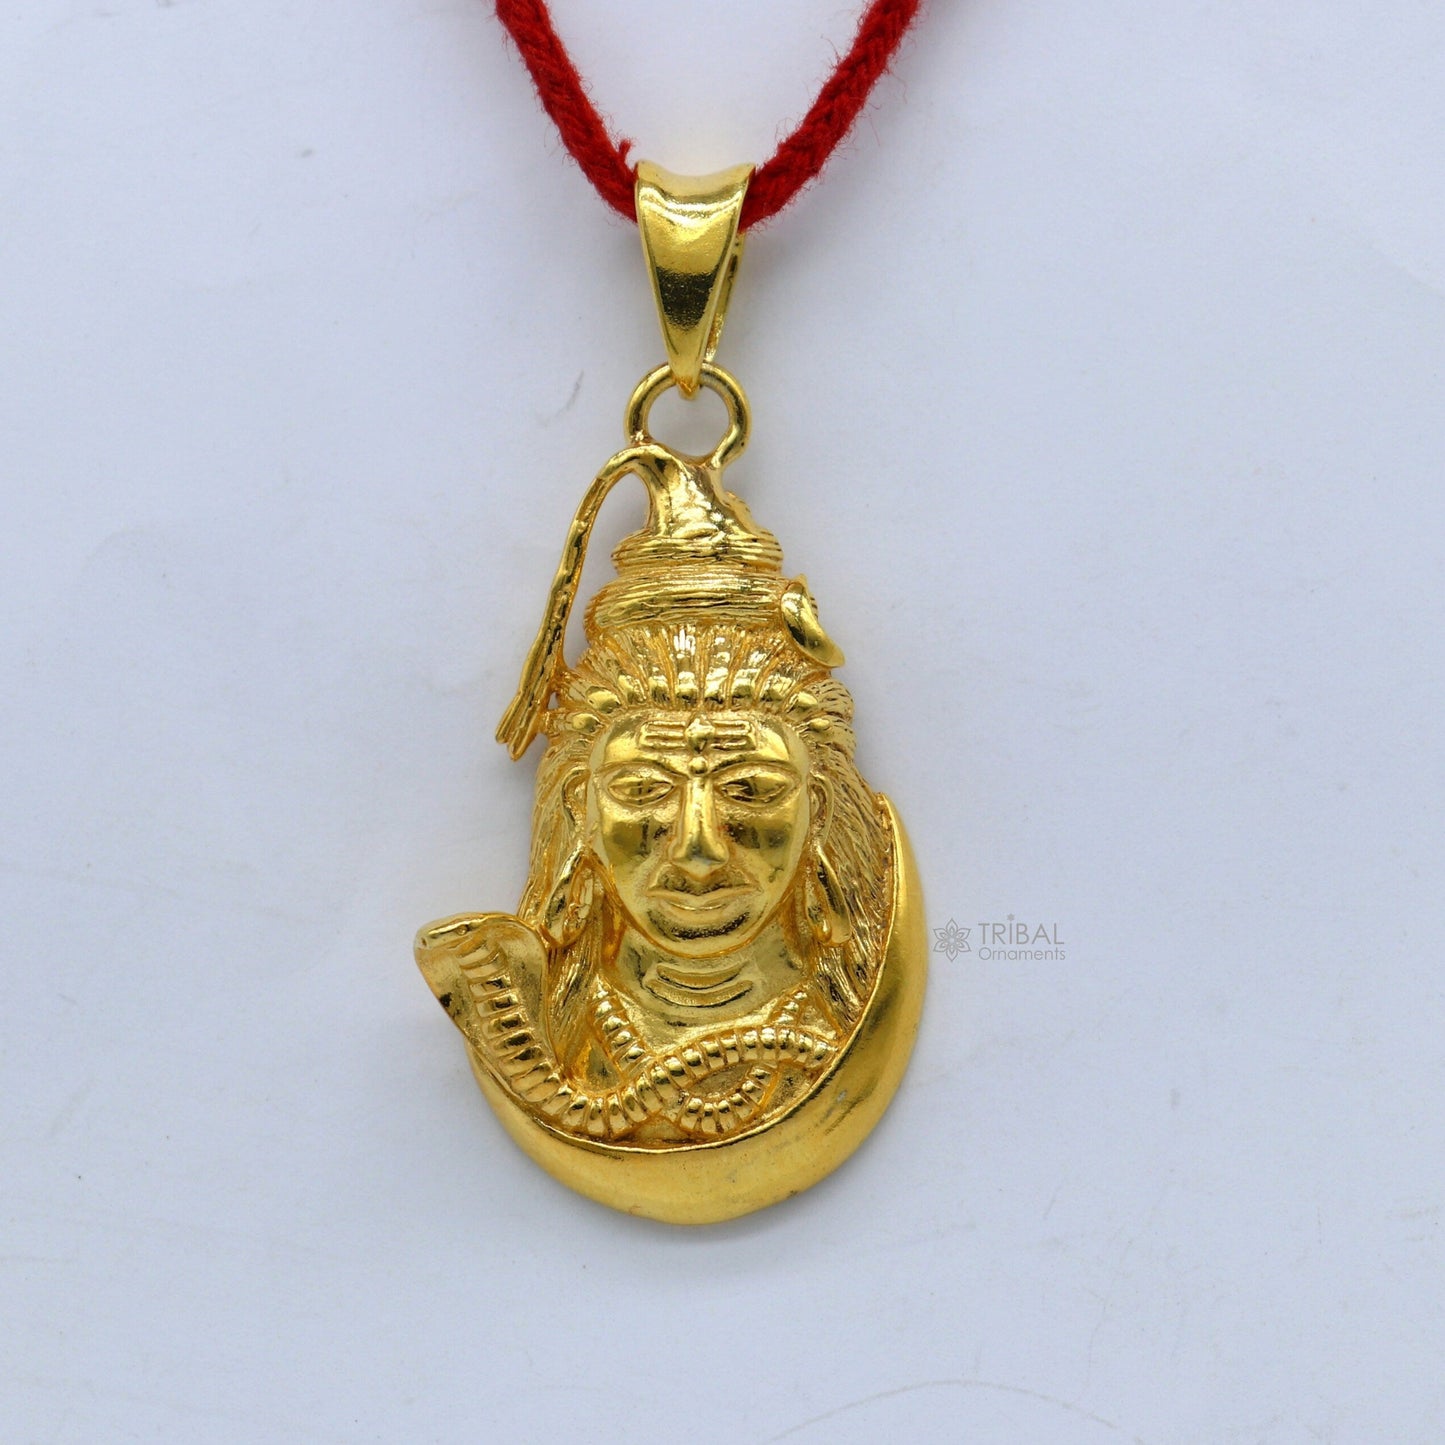 925 sterling silver amazing gold polished idol Lord Shiva pendant, excellent gifting unisex locket pendant customized jewelry nsp617 - TRIBAL ORNAMENTS